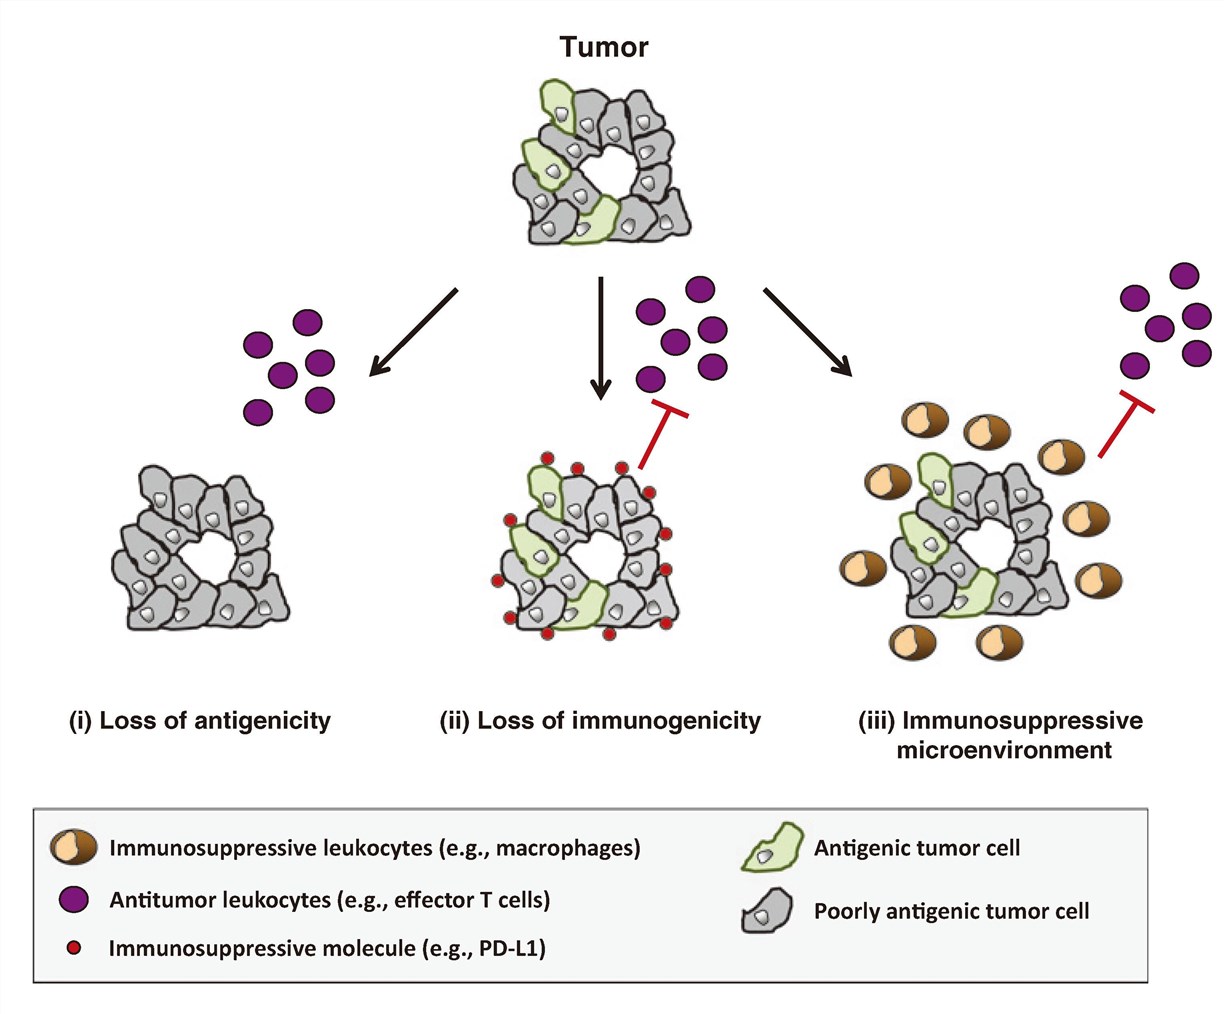 Immune escape mechanisms in cancer.